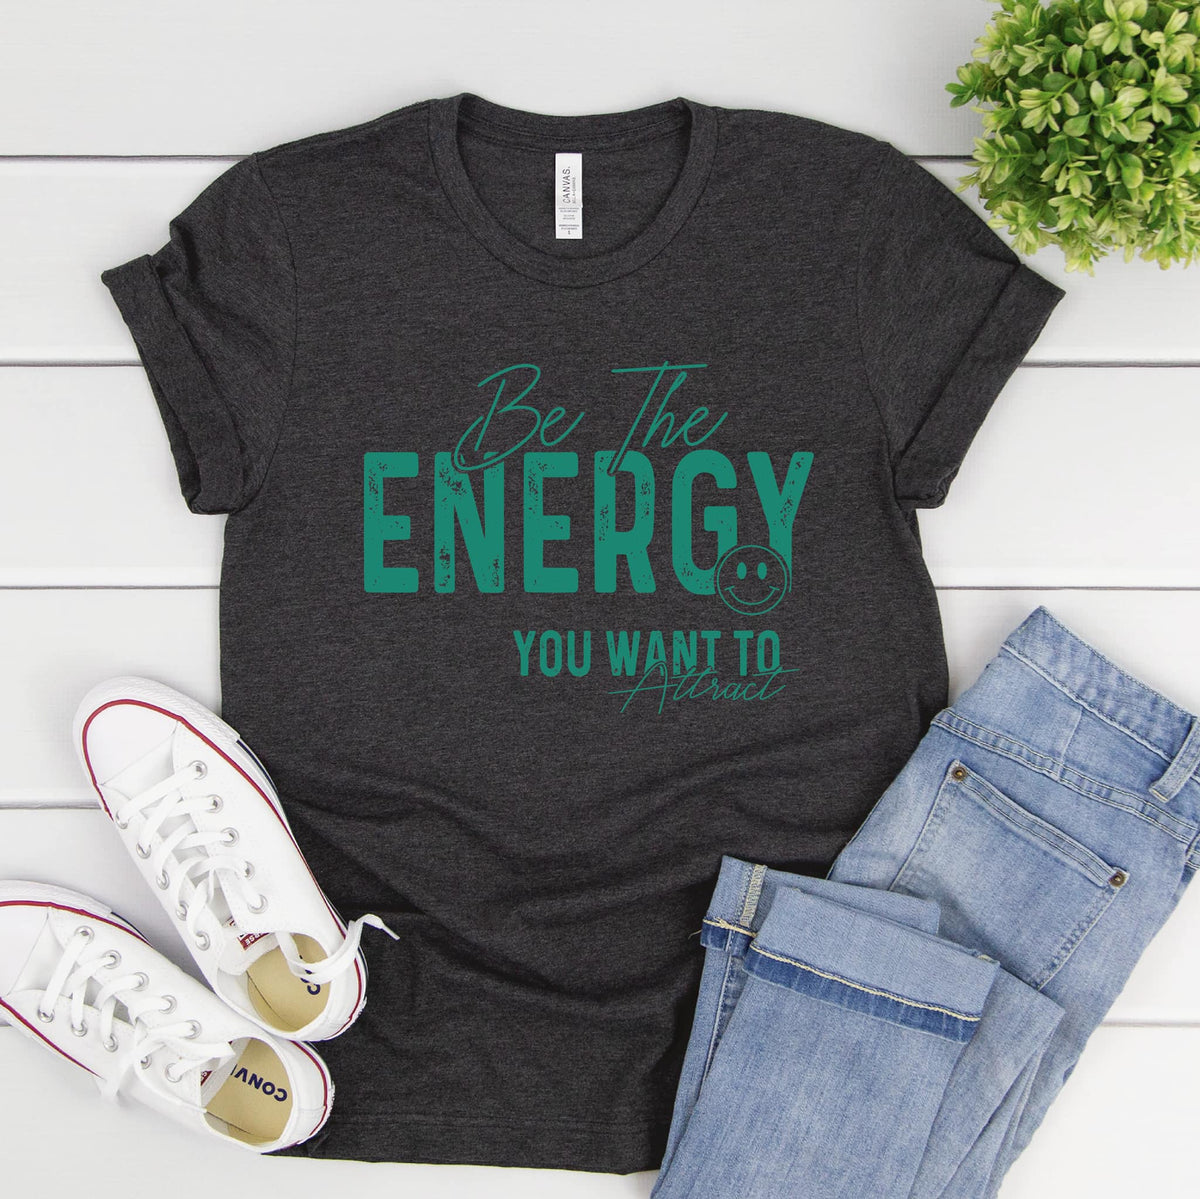 Be The Energy Graphic Tee/Sweatshirt options -Ships in 5 business days